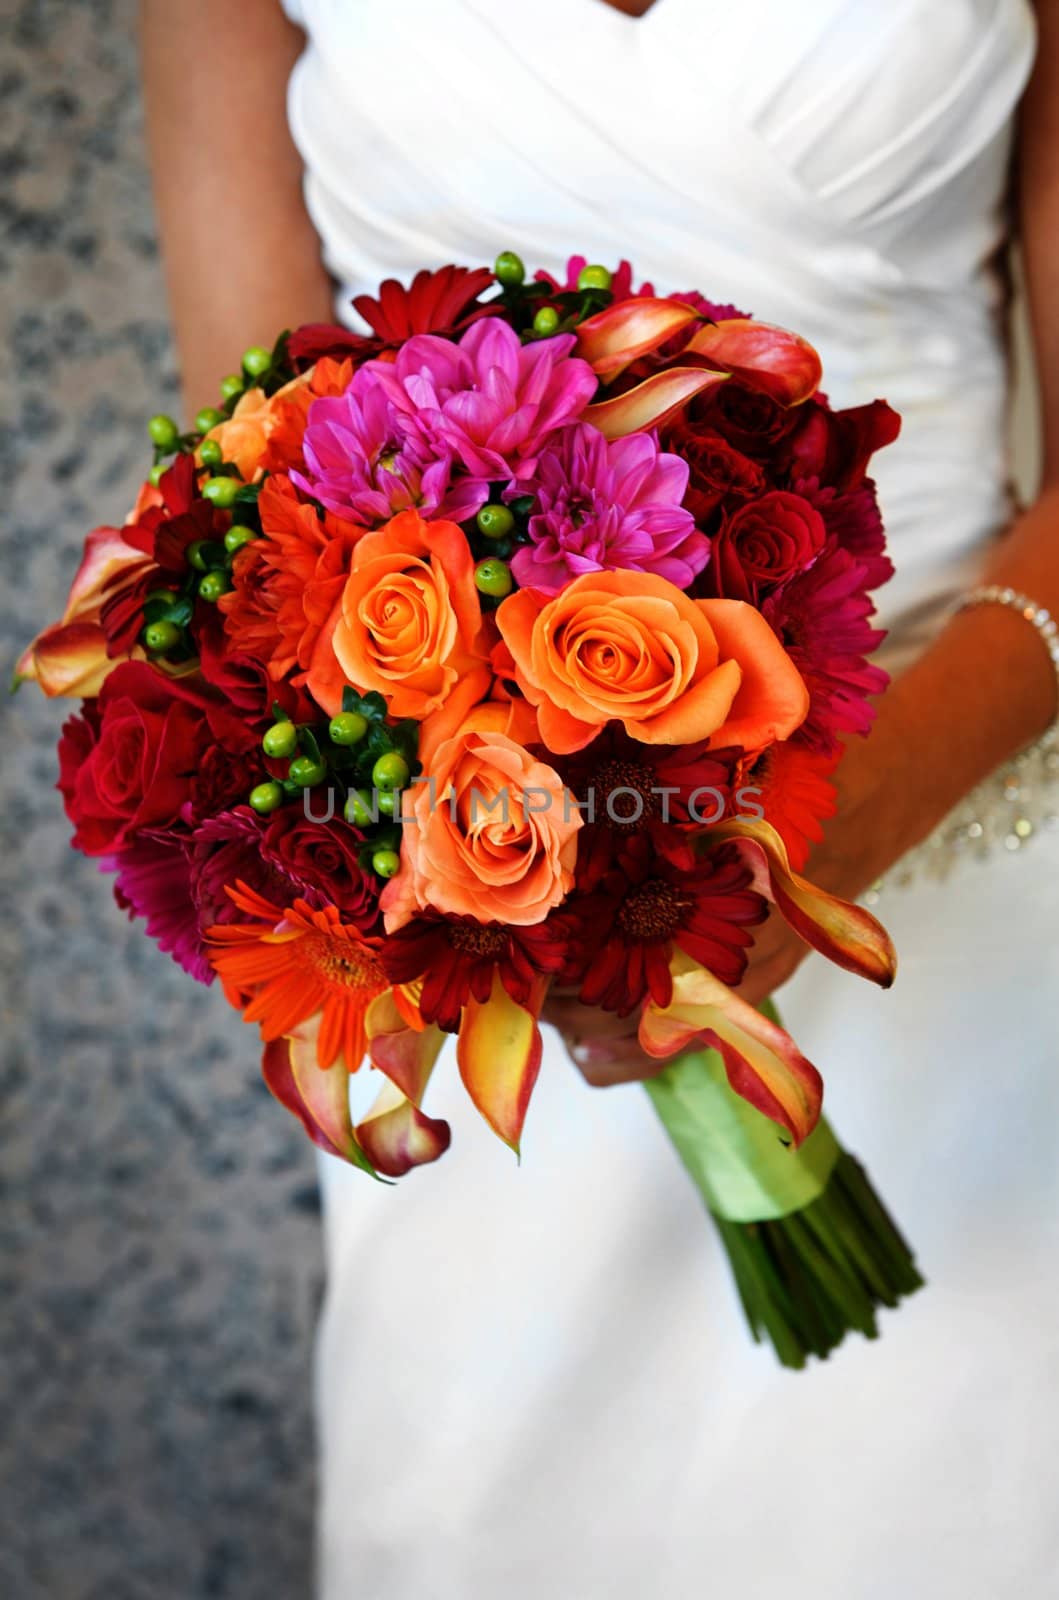 Image of a bride holding colorful bouquet